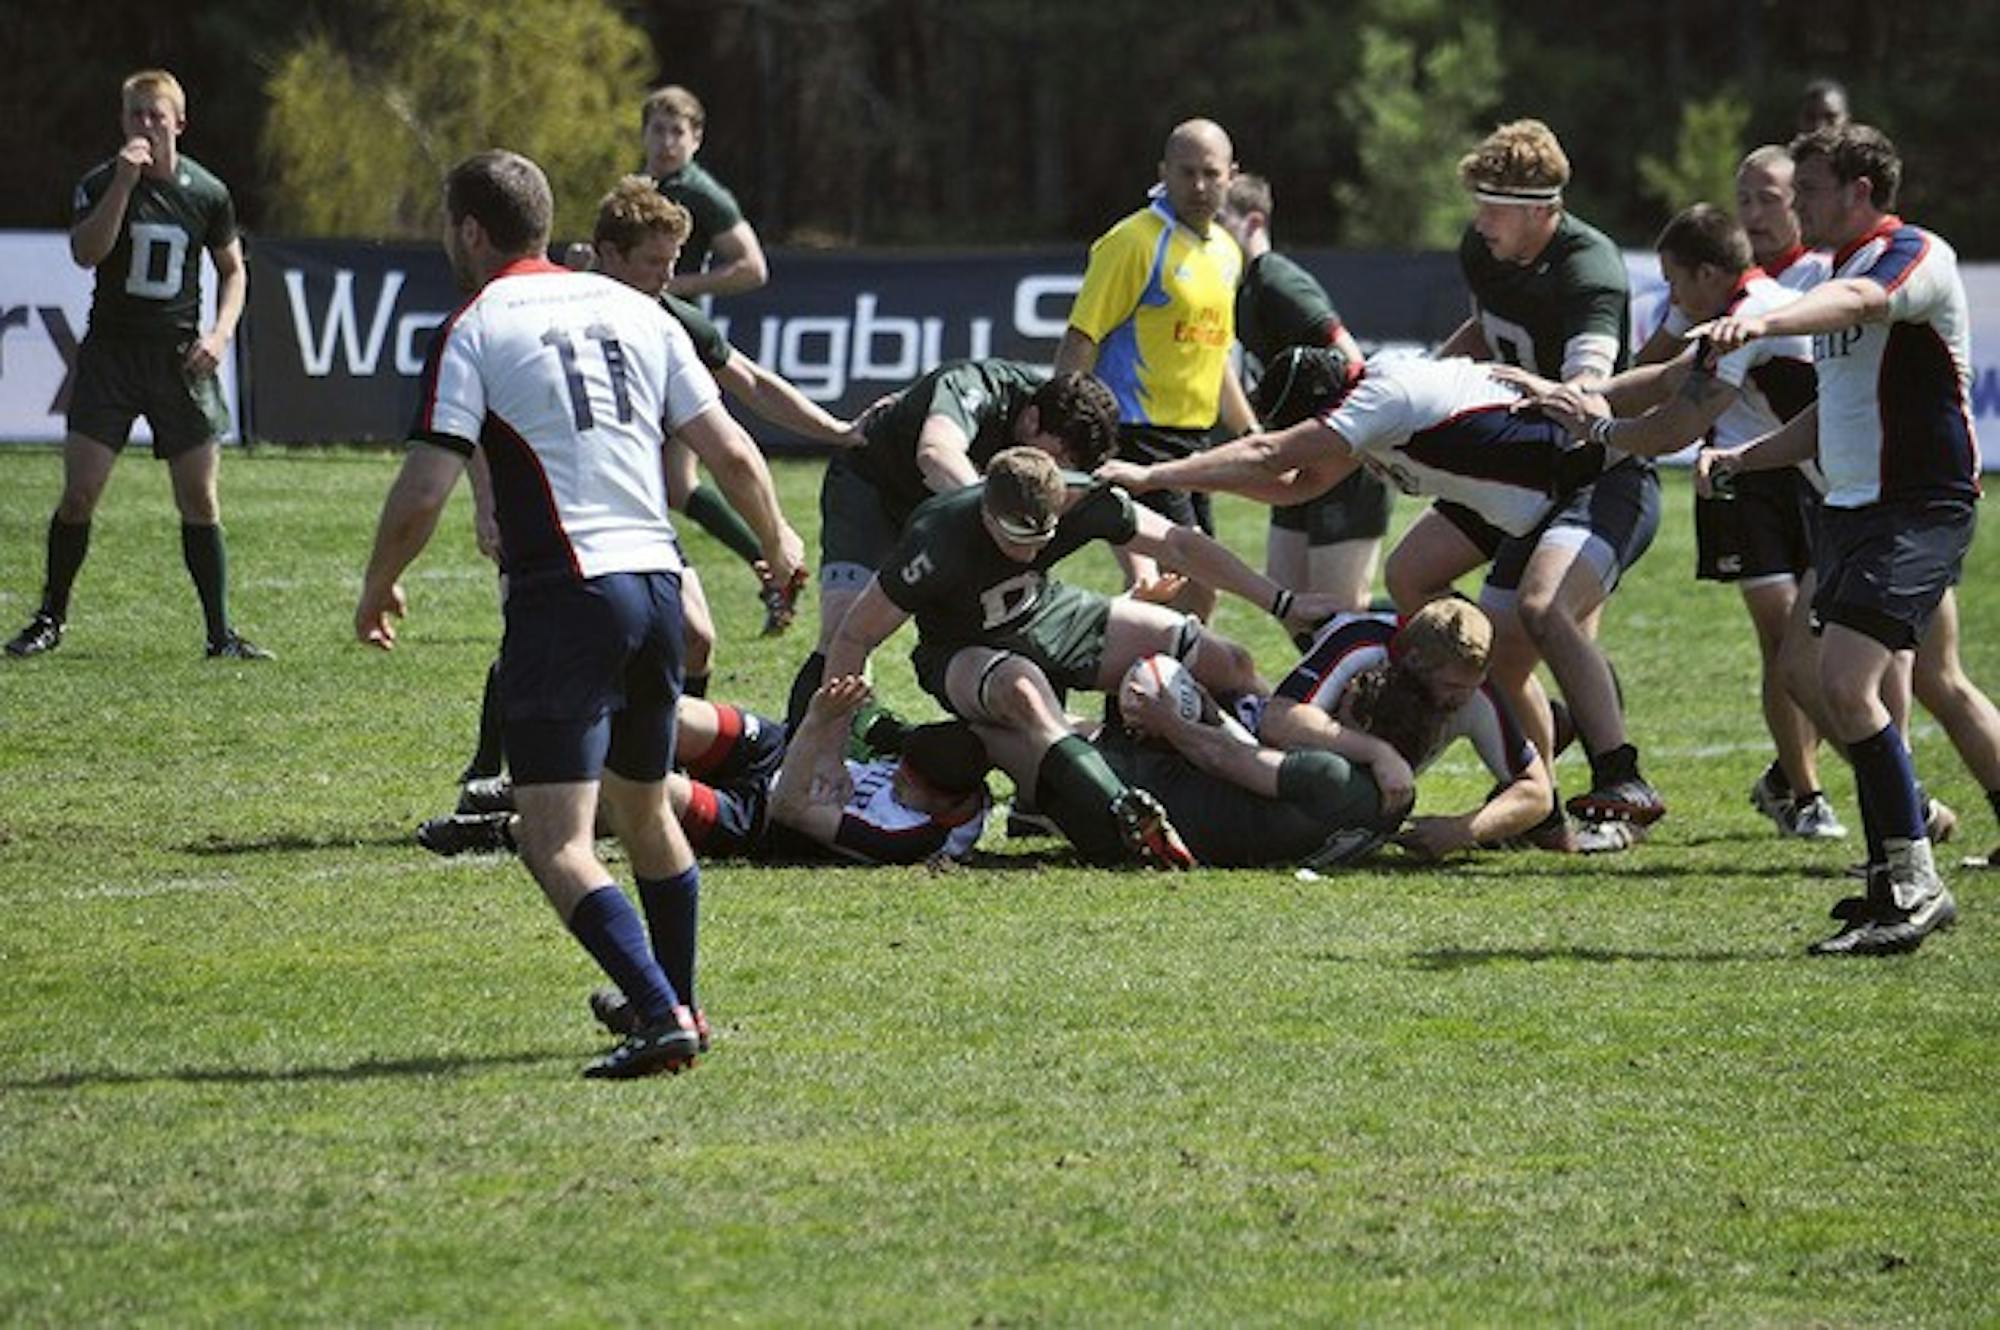 The men's rugby team will look to defend its USA 7s Collegiate Rugby championship June 2-3 in Philadelphia.